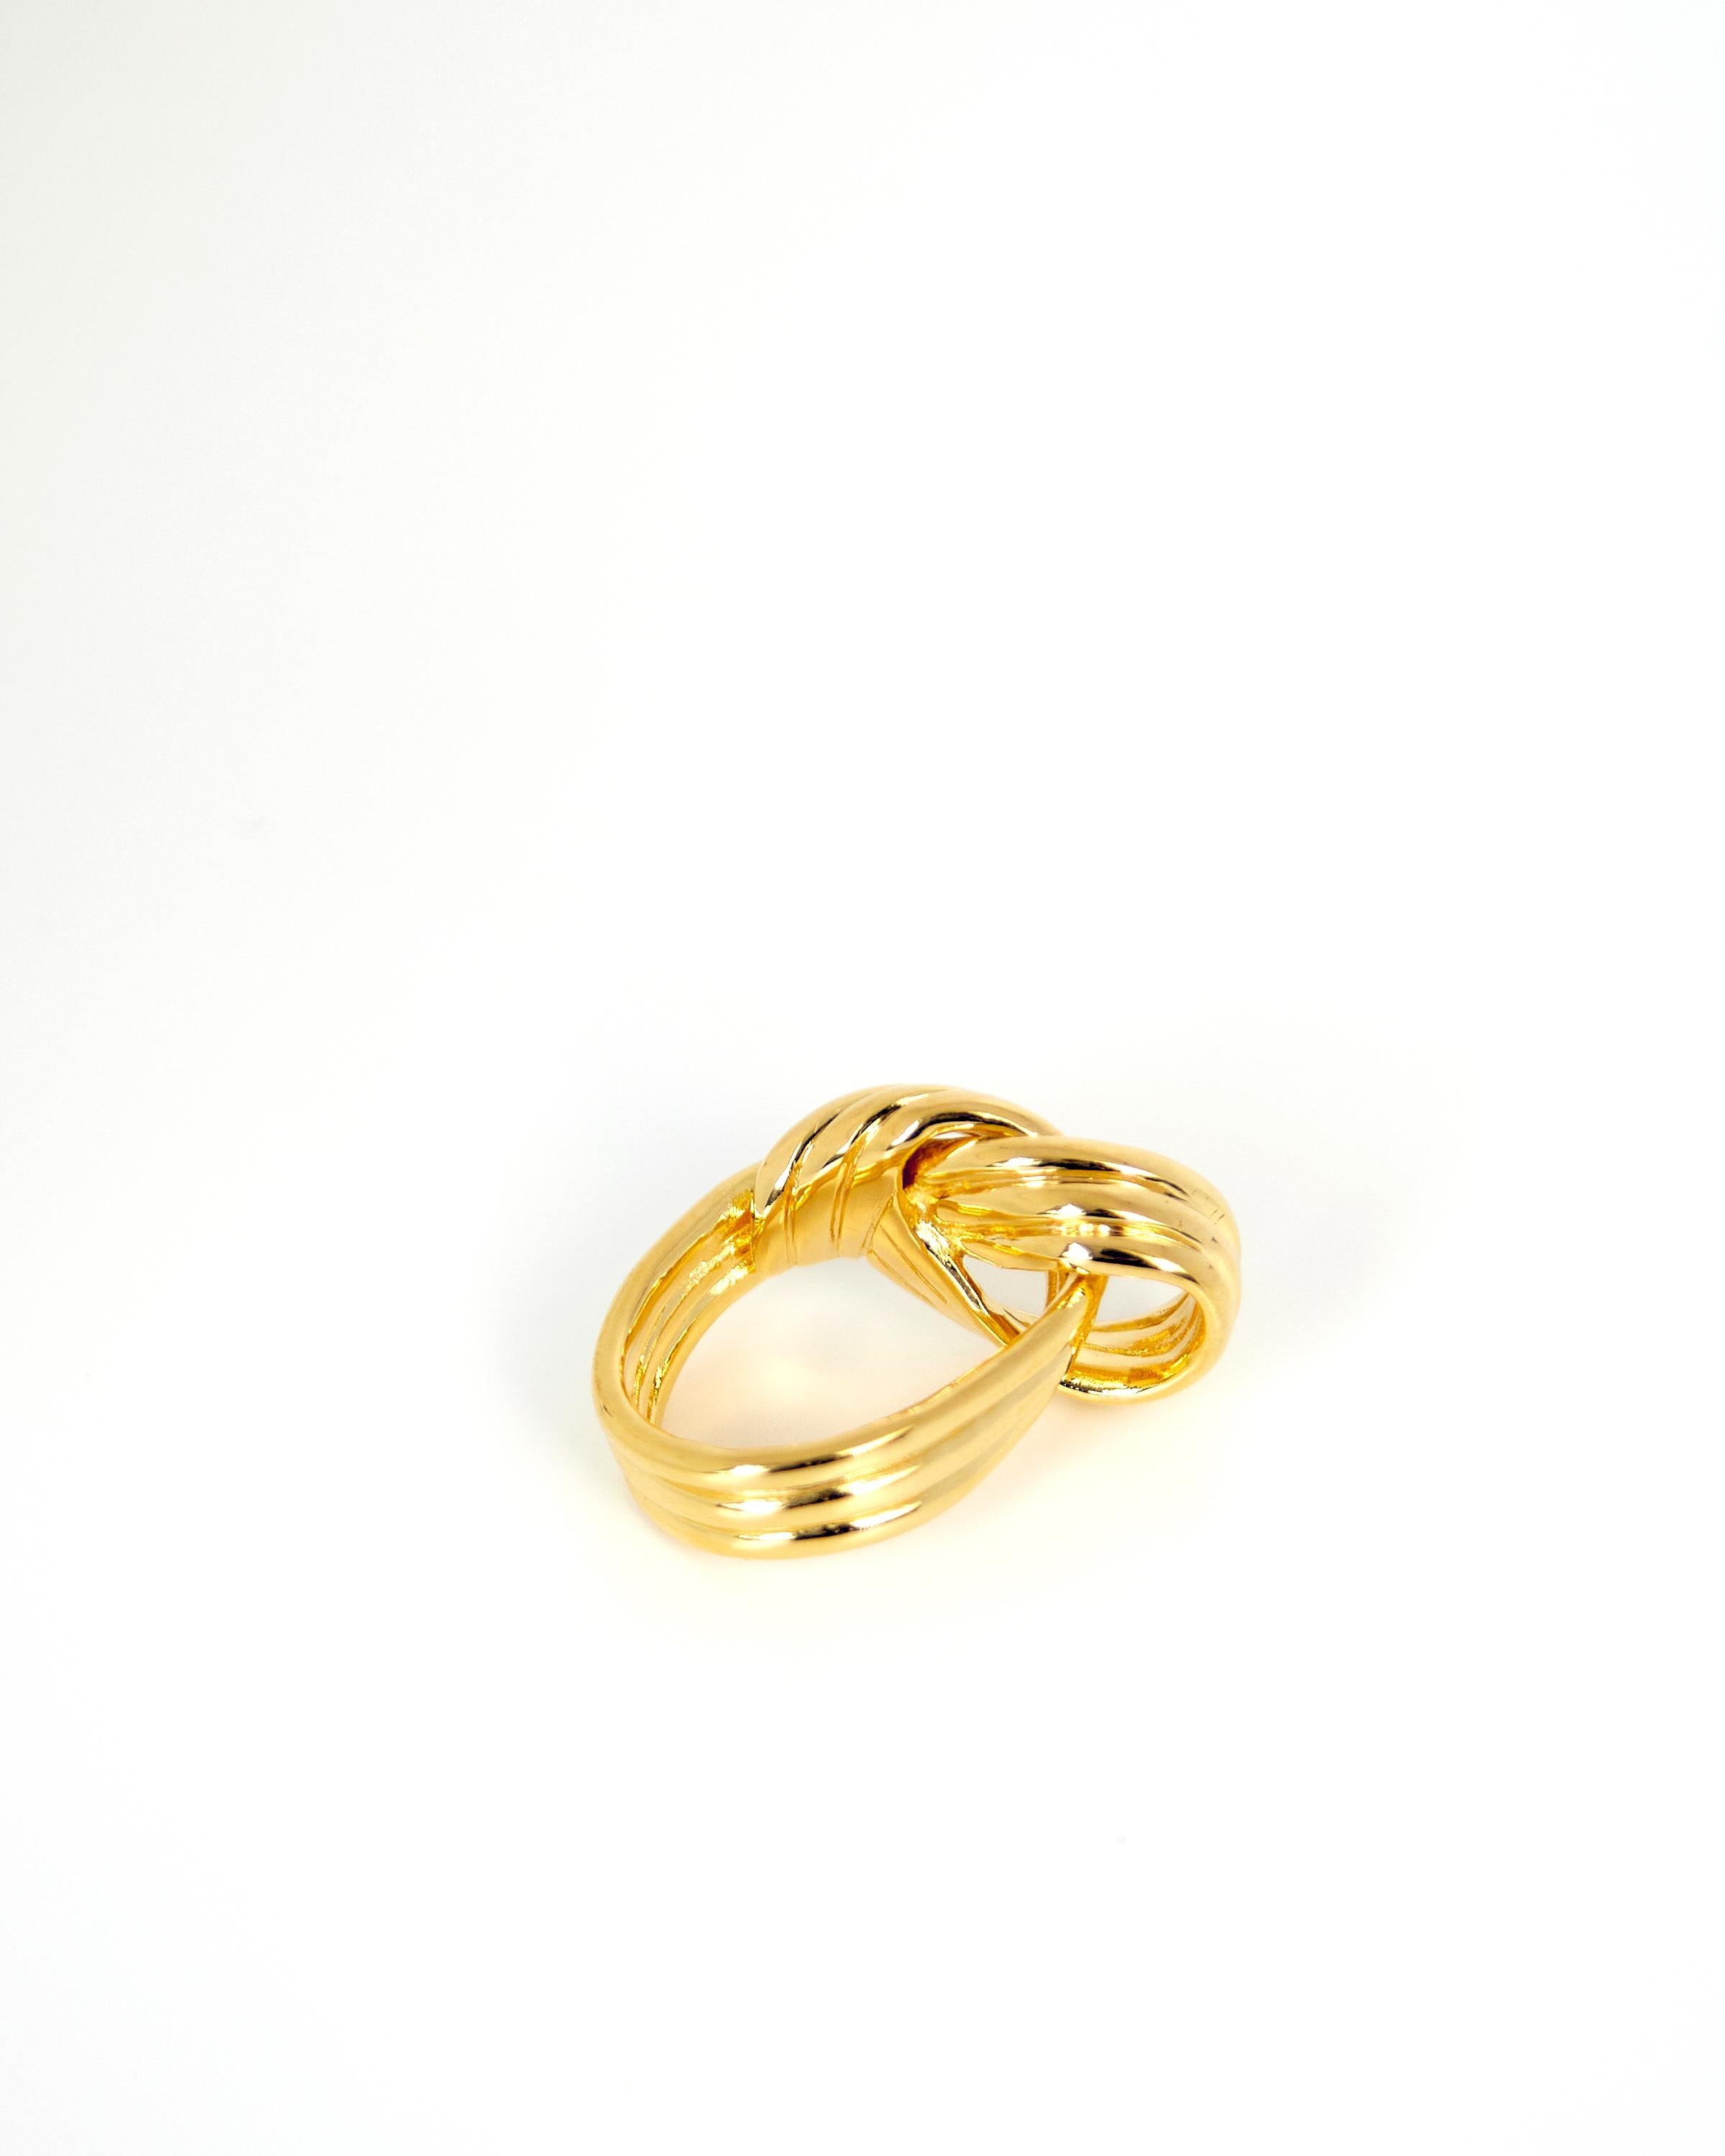 Women's or Men's 70s Inspired Braid Ring, 18 Carat Gold Plated (Small) For Sale